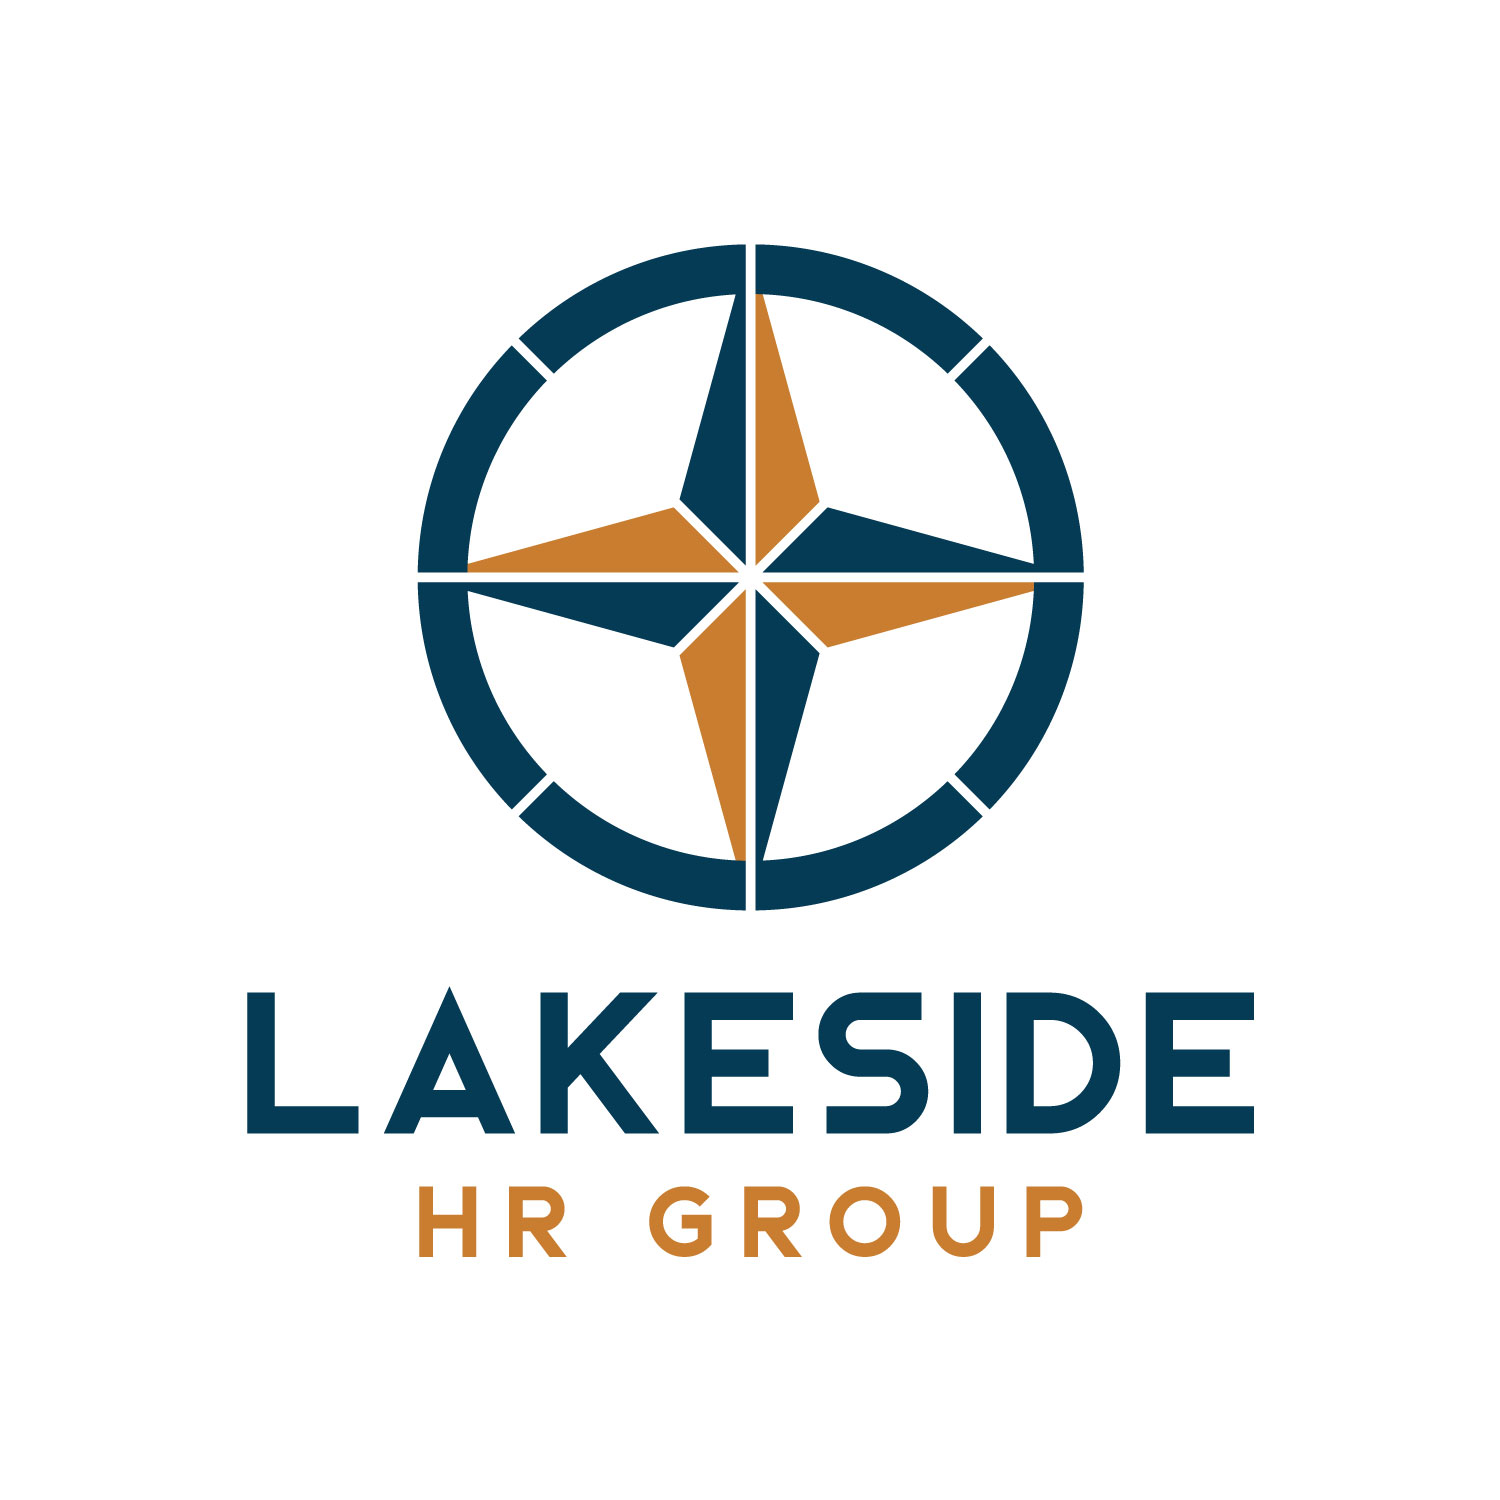 Lakeside HR Group Primary Logo